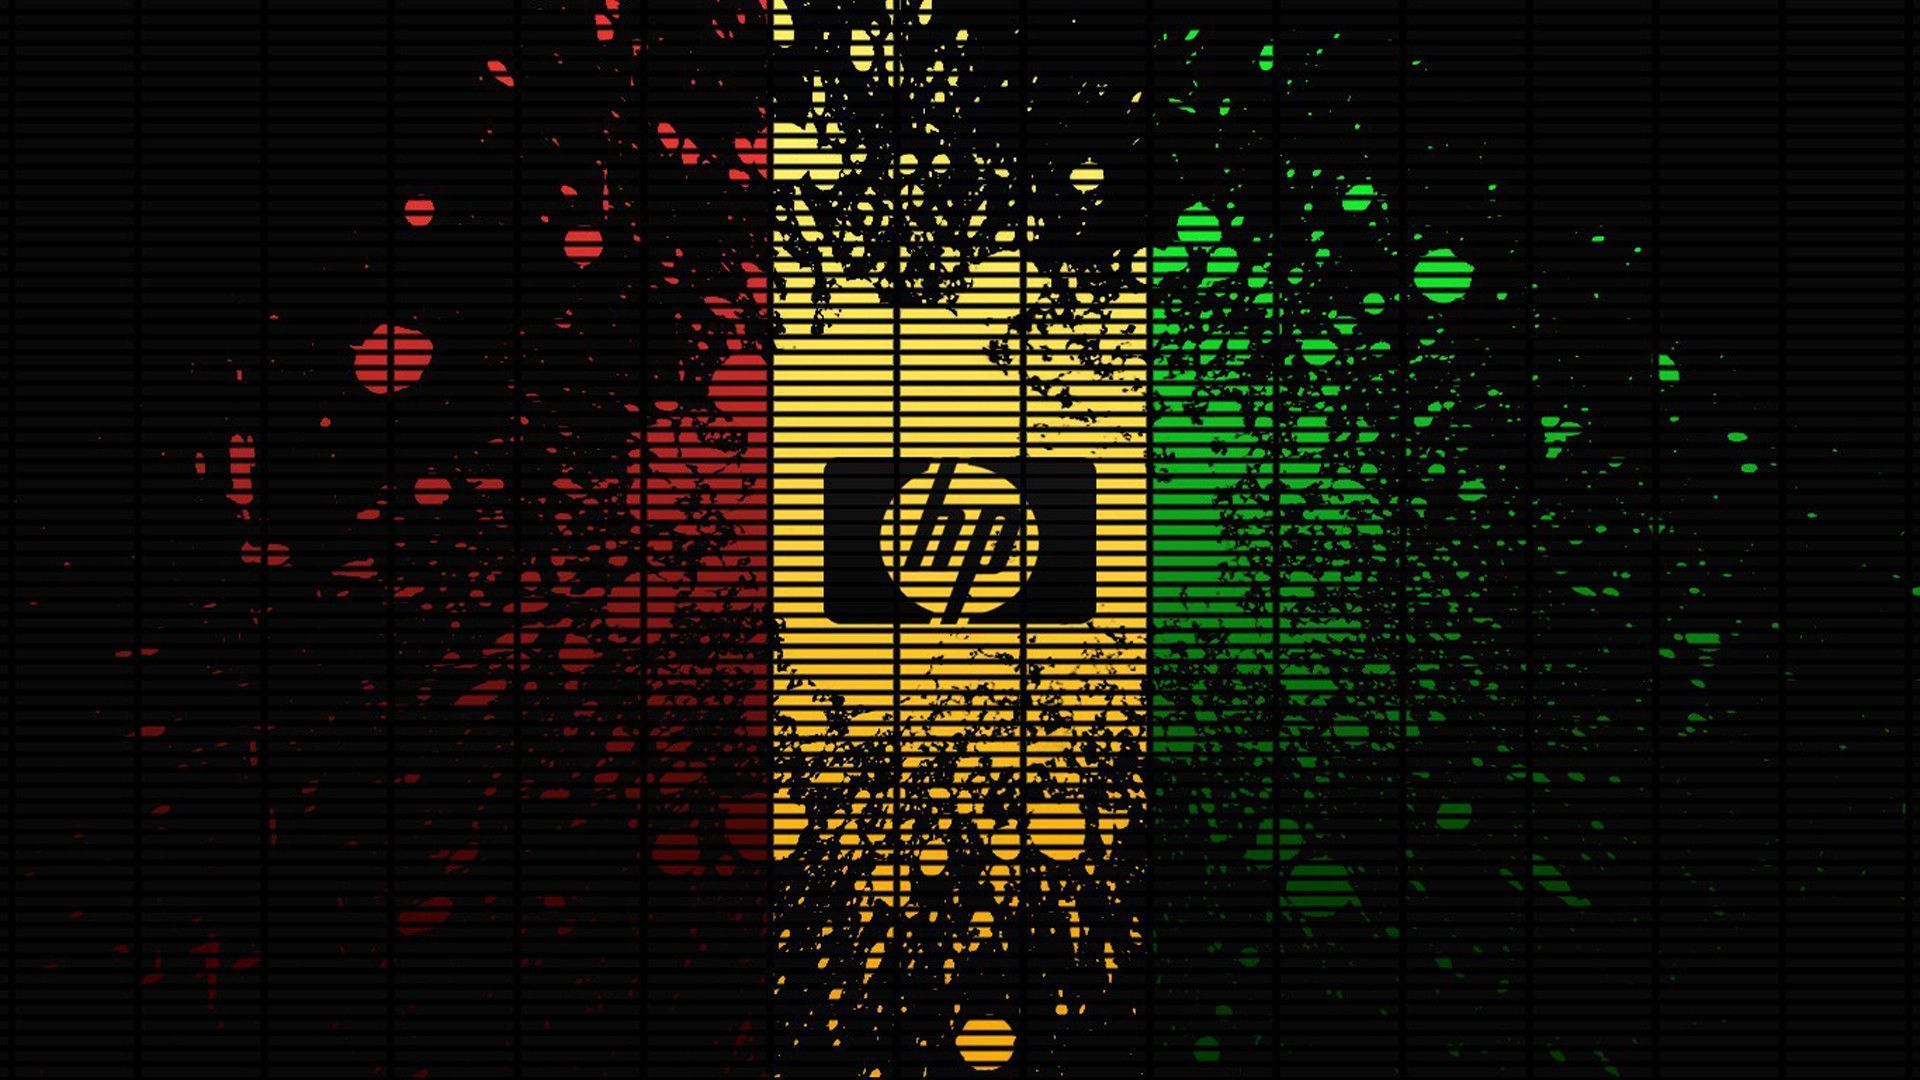 Hp Laptop Backgrounds